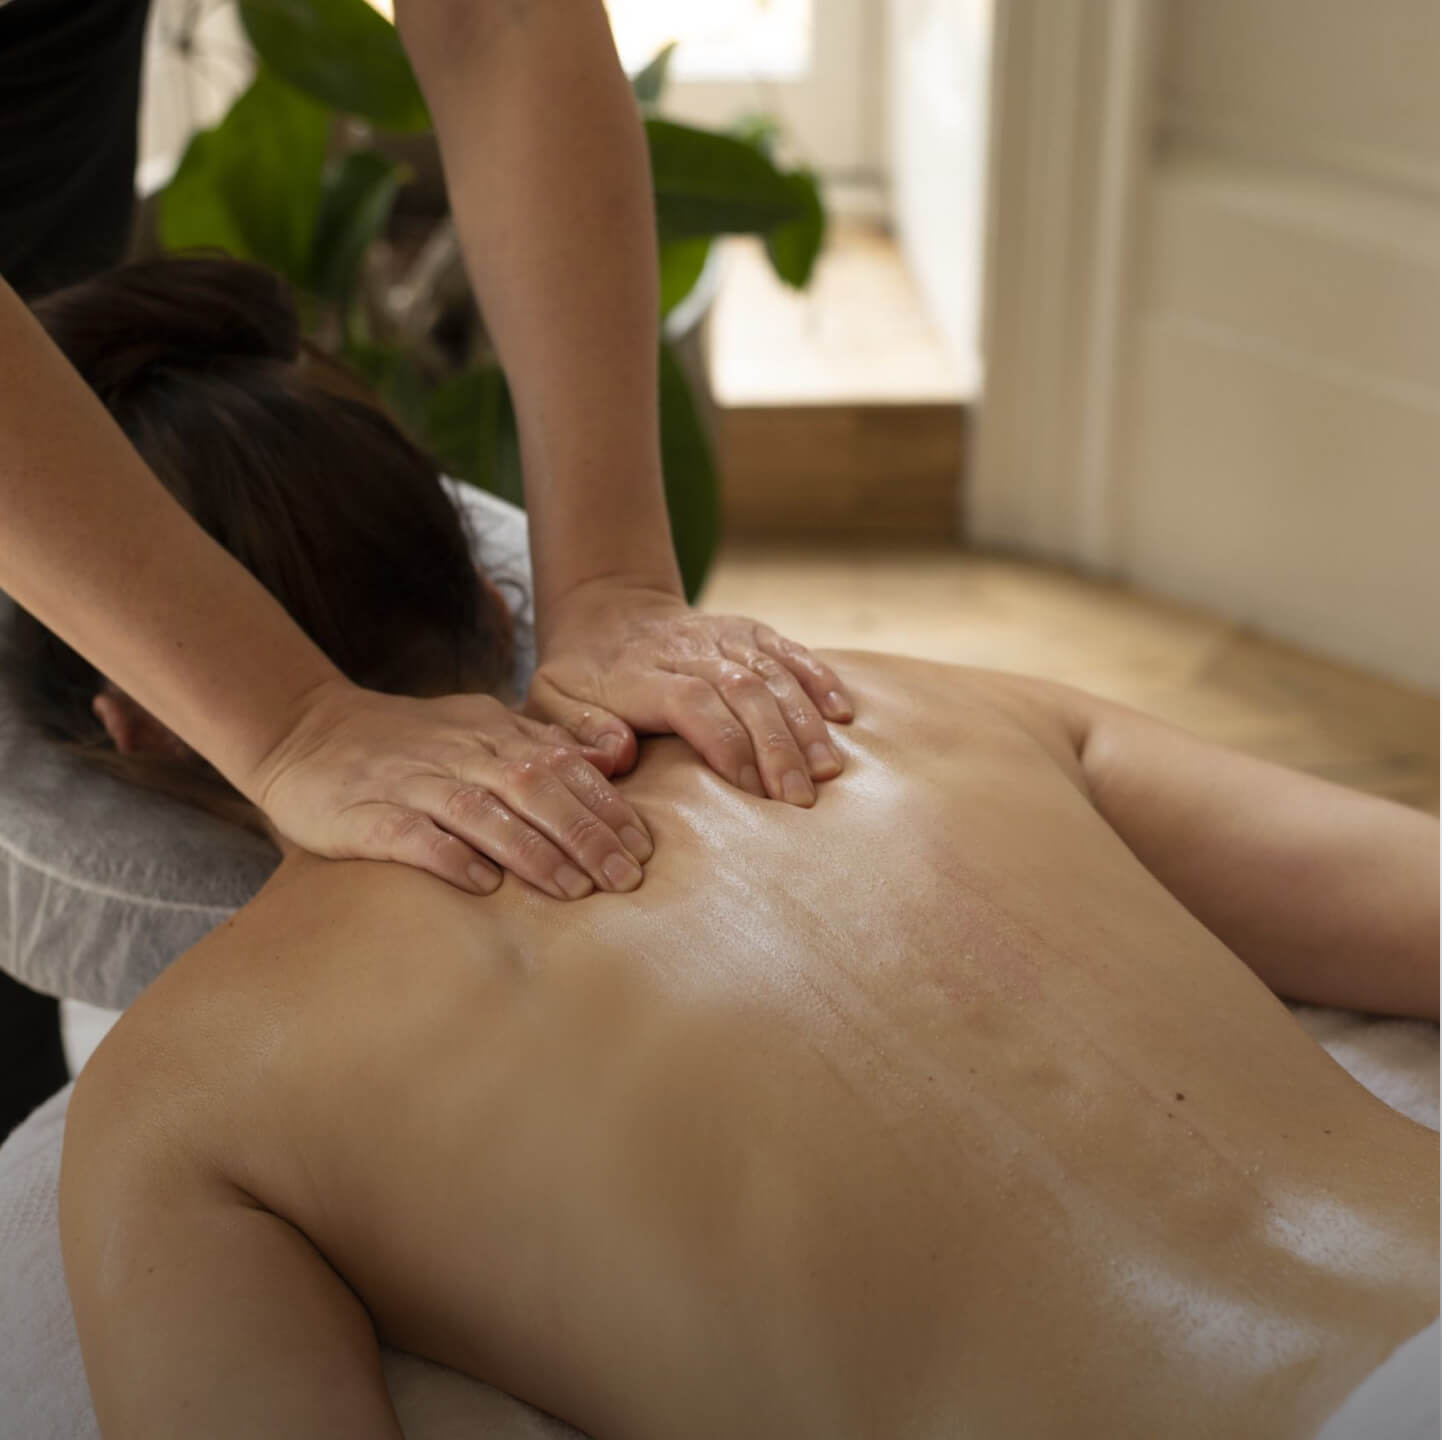 Learn about our at home massage services